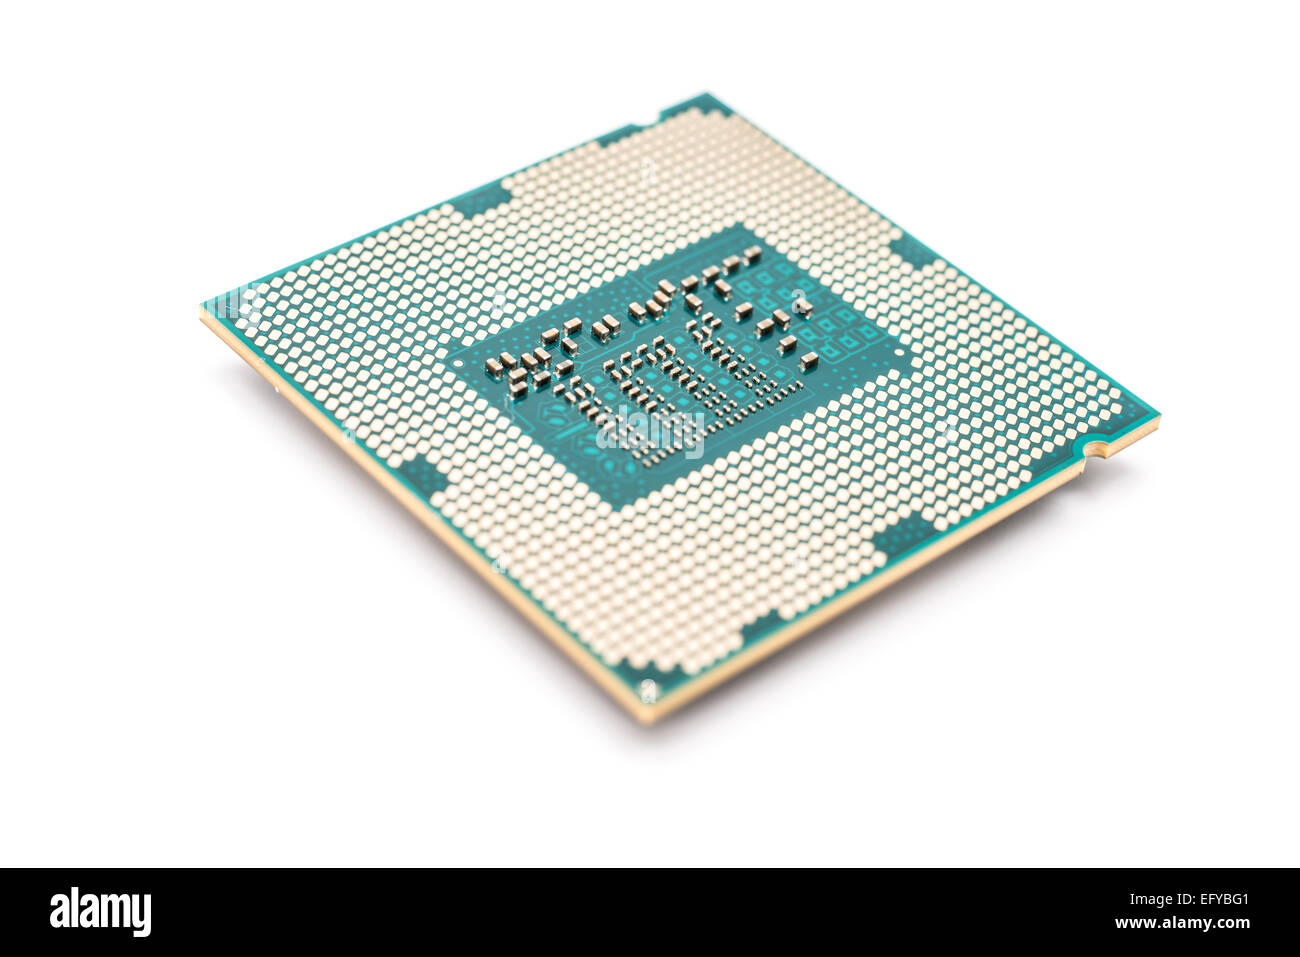 CPU (Central Processing Unit) Computerchip Isolated On White  Stockfotografie - Alamy